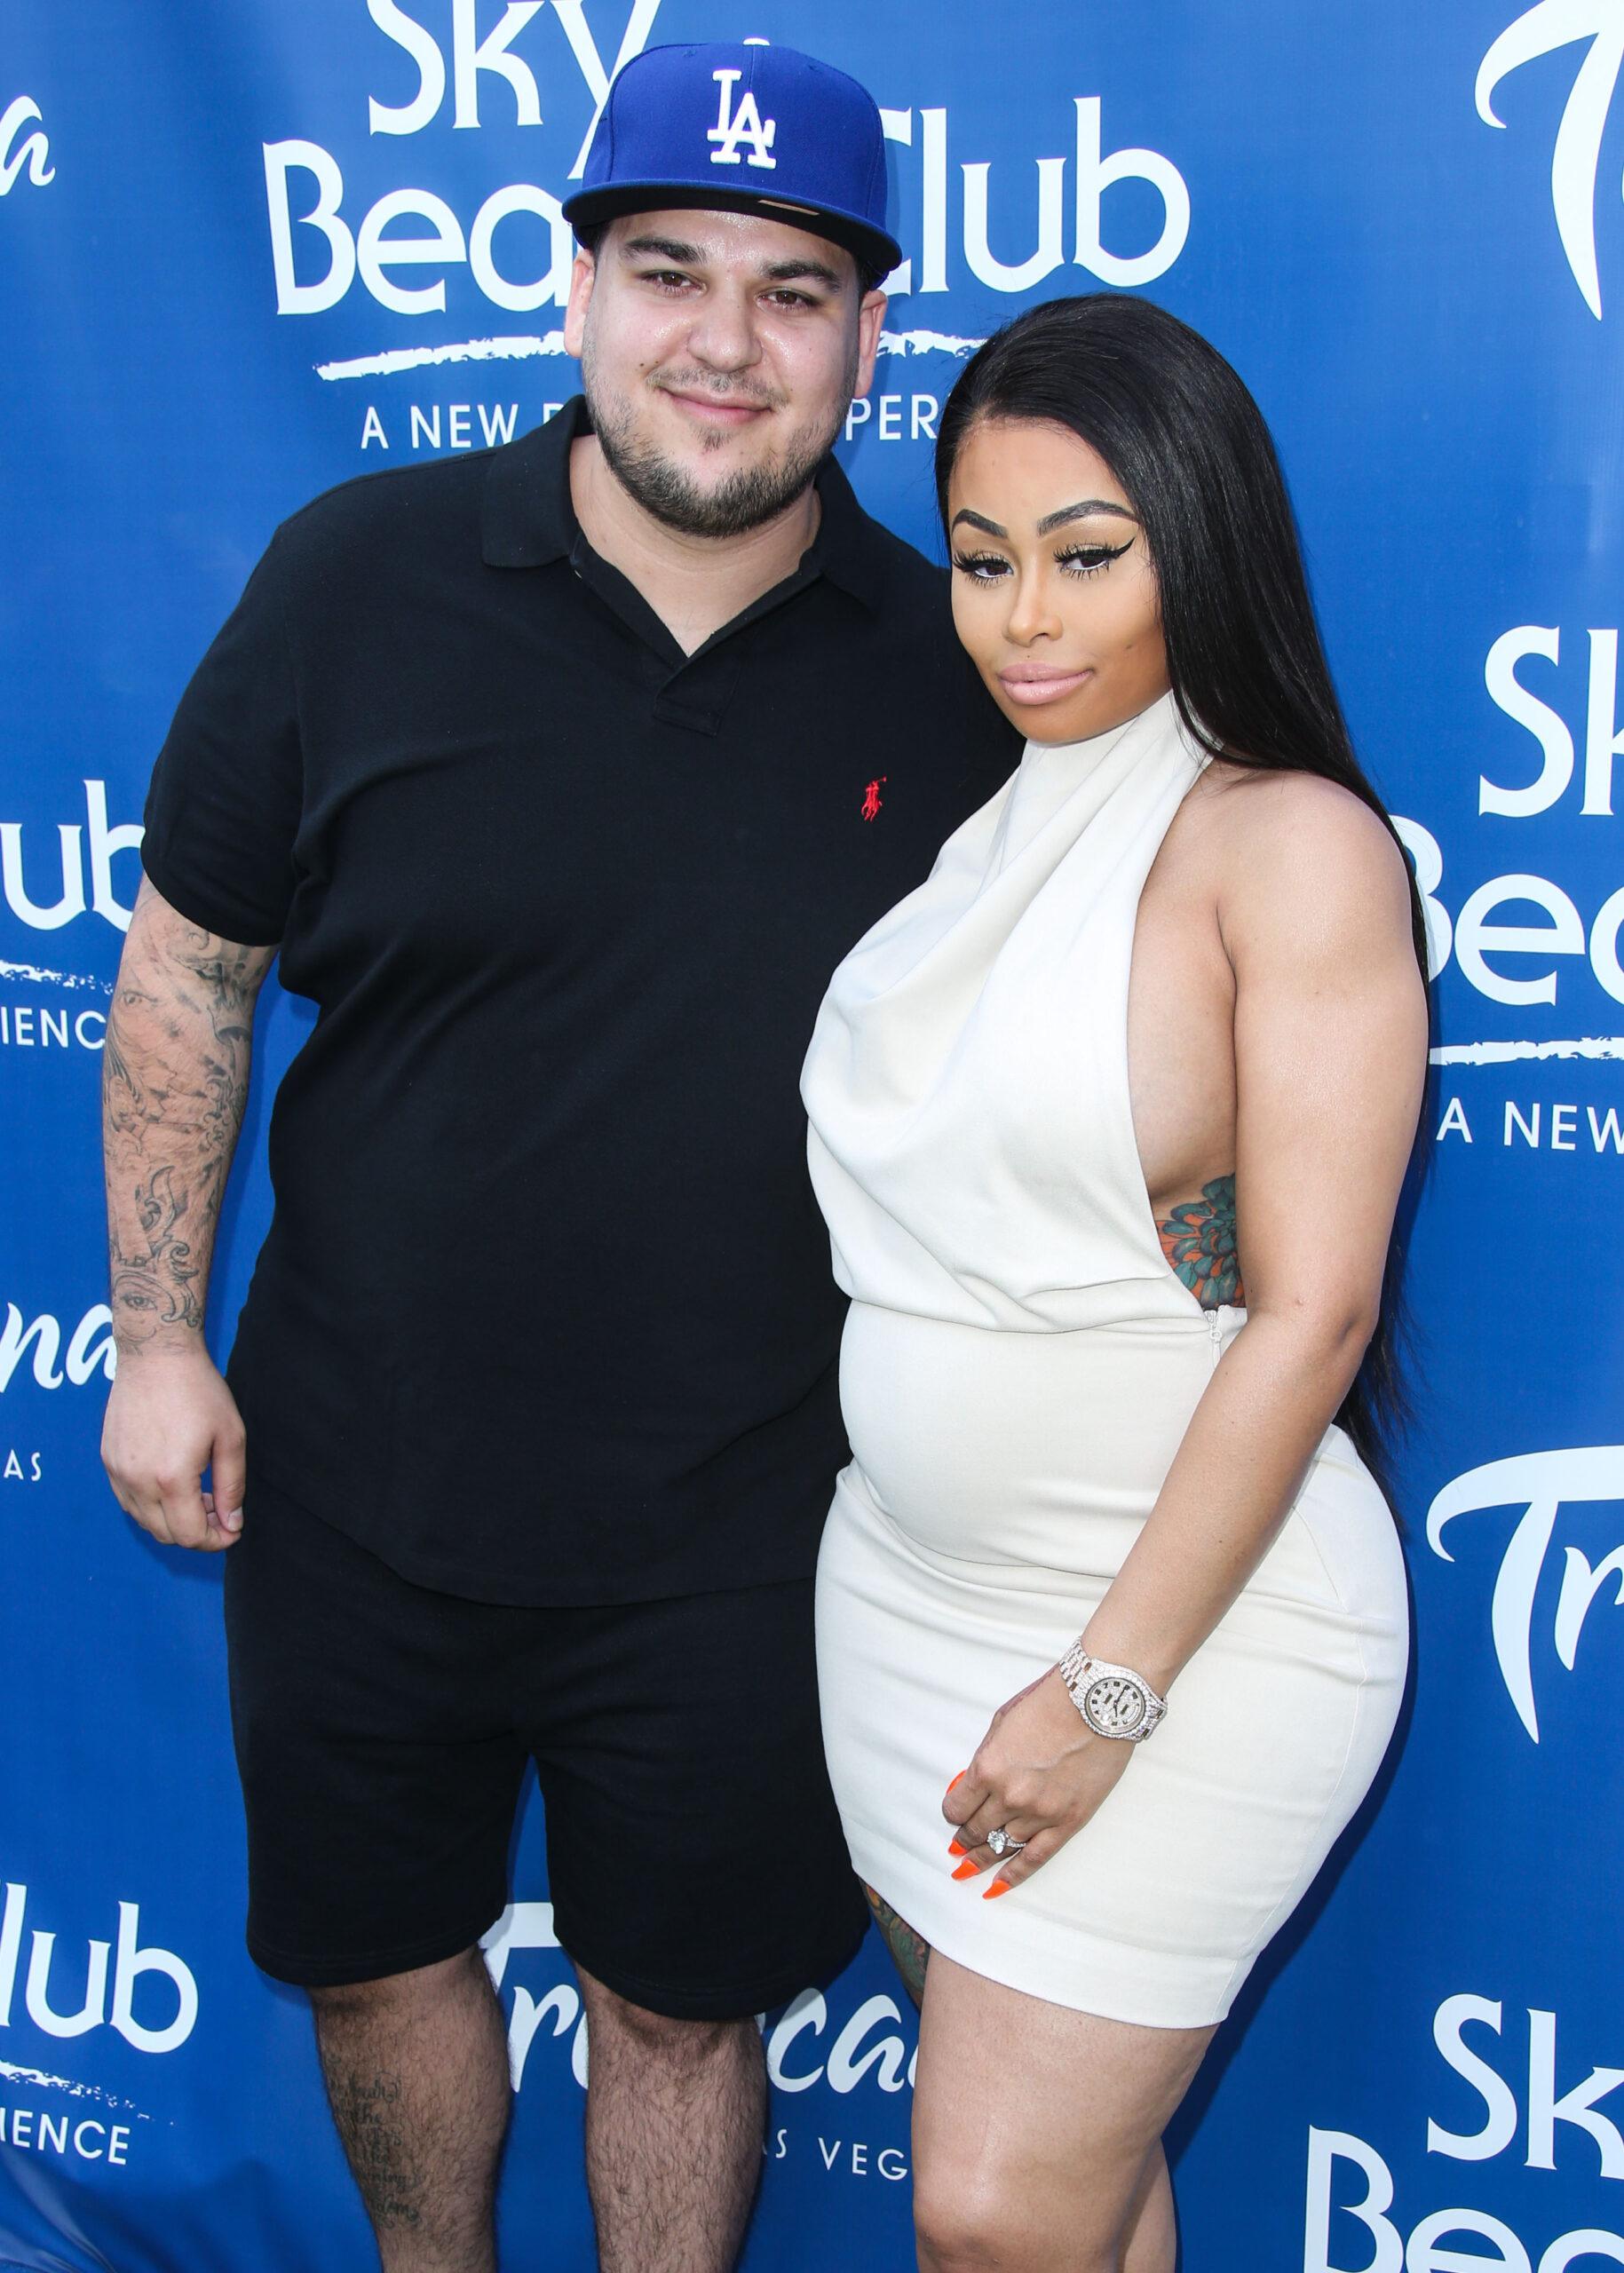 Blac Chyna Breaks Her Silence On Kim & Kanye’s Divorce, ‘Just Be Respectful’